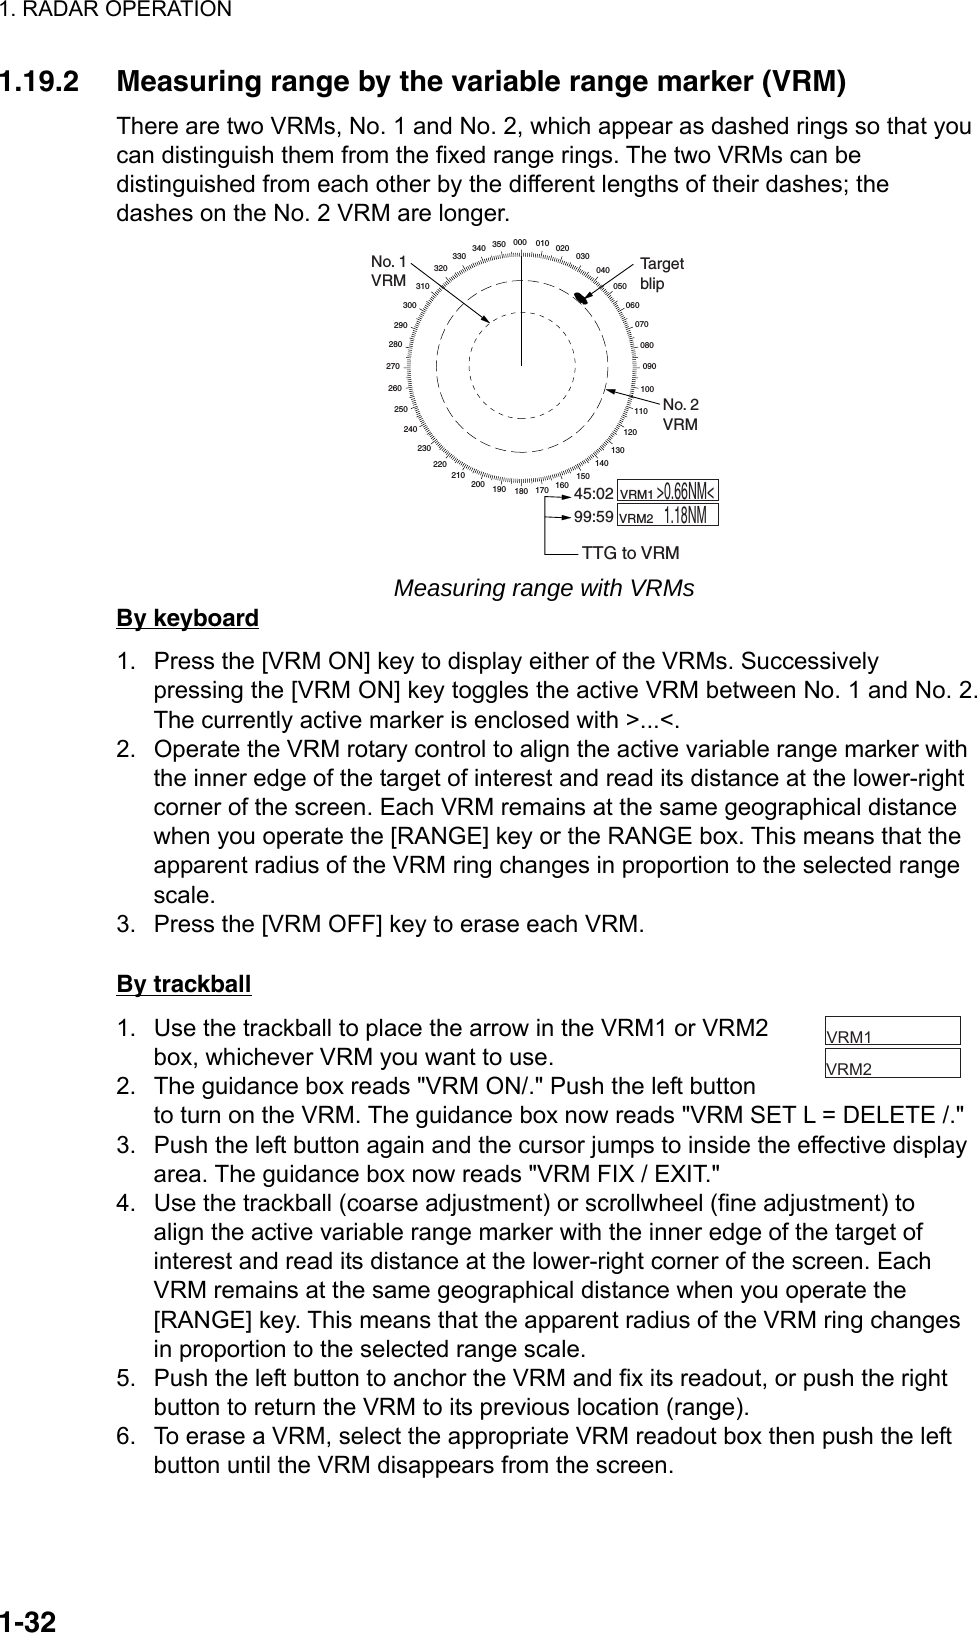 1. RADAR OPERATION  1-32    VRM1        VRM2  1.19.2  Measuring range by the variable range marker (VRM) There are two VRMs, No. 1 and No. 2, which appear as dashed rings so that you can distinguish them from the fixed range rings. The two VRMs can be distinguished from each other by the different lengths of their dashes; the dashes on the No. 2 VRM are longer. 000 010 020030040050060070080090100110120130140150160170180190200210220230240250260270280290300310320330 340 350No. 1VRMTargetblipNo. 2VRM    VRM1         VRM2  &gt;0.66NM&lt;1.18NM45:0299:59TTG to VRM Measuring range with VRMs By keyboard 1.  Press the [VRM ON] key to display either of the VRMs. Successively pressing the [VRM ON] key toggles the active VRM between No. 1 and No. 2. The currently active marker is enclosed with &gt;...&lt;. 2.  Operate the VRM rotary control to align the active variable range marker with the inner edge of the target of interest and read its distance at the lower-right corner of the screen. Each VRM remains at the same geographical distance when you operate the [RANGE] key or the RANGE box. This means that the apparent radius of the VRM ring changes in proportion to the selected range scale.  3.  Press the [VRM OFF] key to erase each VRM.  By trackball 1.  Use the trackball to place the arrow in the VRM1 or VRM2 box, whichever VRM you want to use. 2.  The guidance box reads &quot;VRM ON/.&quot; Push the left button to turn on the VRM. The guidance box now reads &quot;VRM SET L = DELETE /.&quot; 3.  Push the left button again and the cursor jumps to inside the effective display area. The guidance box now reads &quot;VRM FIX / EXIT.&quot; 4.  Use the trackball (coarse adjustment) or scrollwheel (fine adjustment) to align the active variable range marker with the inner edge of the target of interest and read its distance at the lower-right corner of the screen. Each VRM remains at the same geographical distance when you operate the [RANGE] key. This means that the apparent radius of the VRM ring changes in proportion to the selected range scale. 5.  Push the left button to anchor the VRM and fix its readout, or push the right button to return the VRM to its previous location (range). 6.  To erase a VRM, select the appropriate VRM readout box then push the left button until the VRM disappears from the screen.   